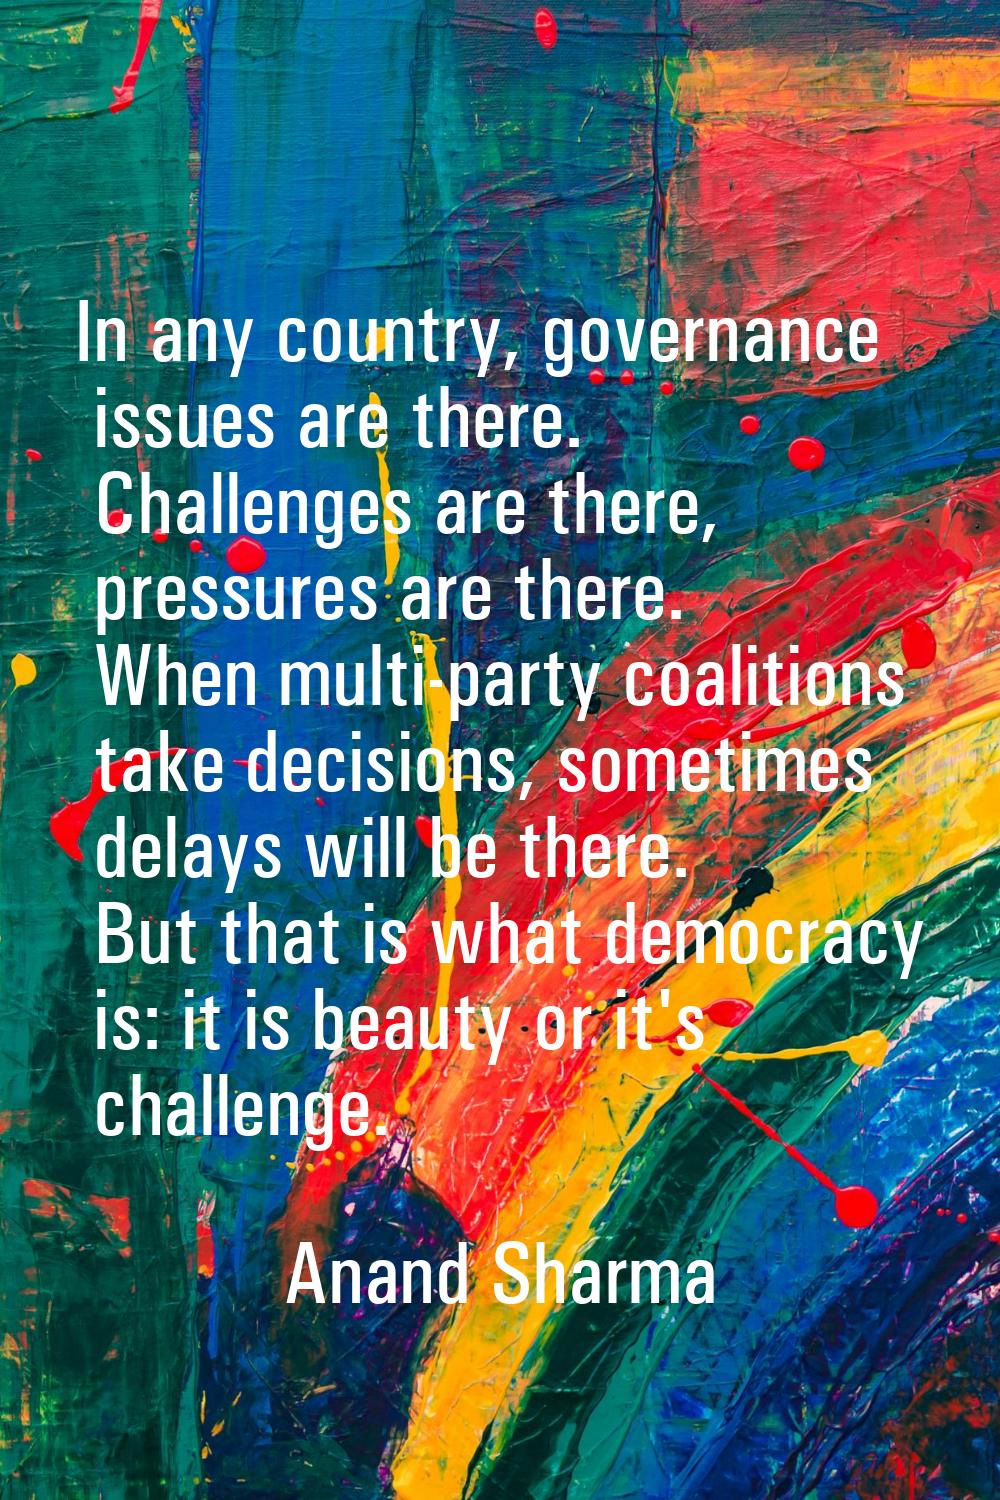 In any country, governance issues are there. Challenges are there, pressures are there. When multi-